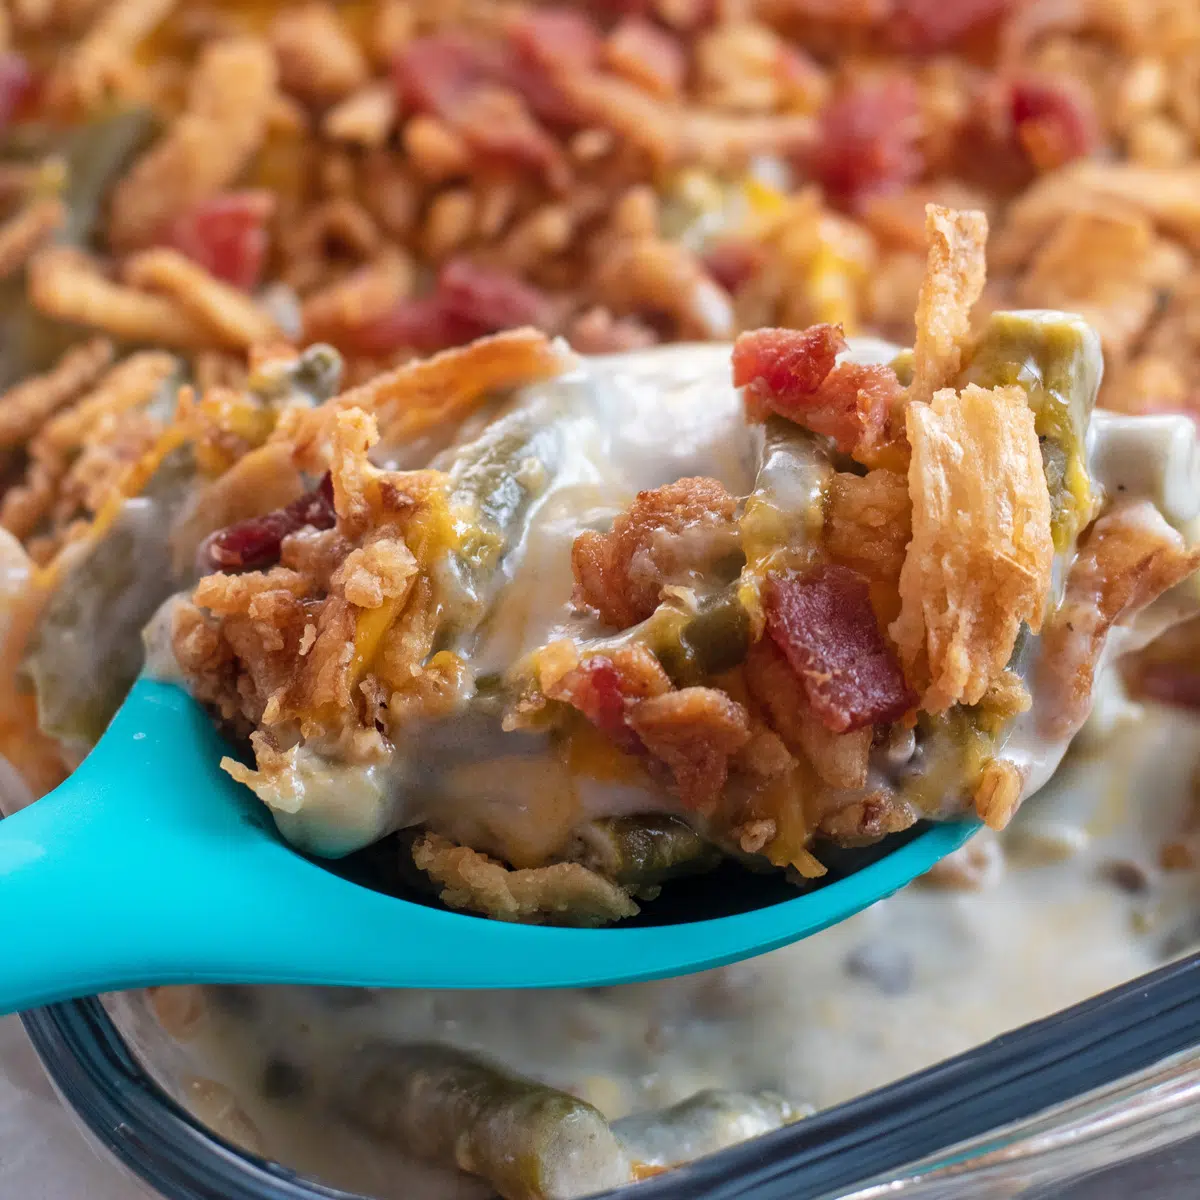 Bacon cheddar green bean casserole being spooned out of dish.